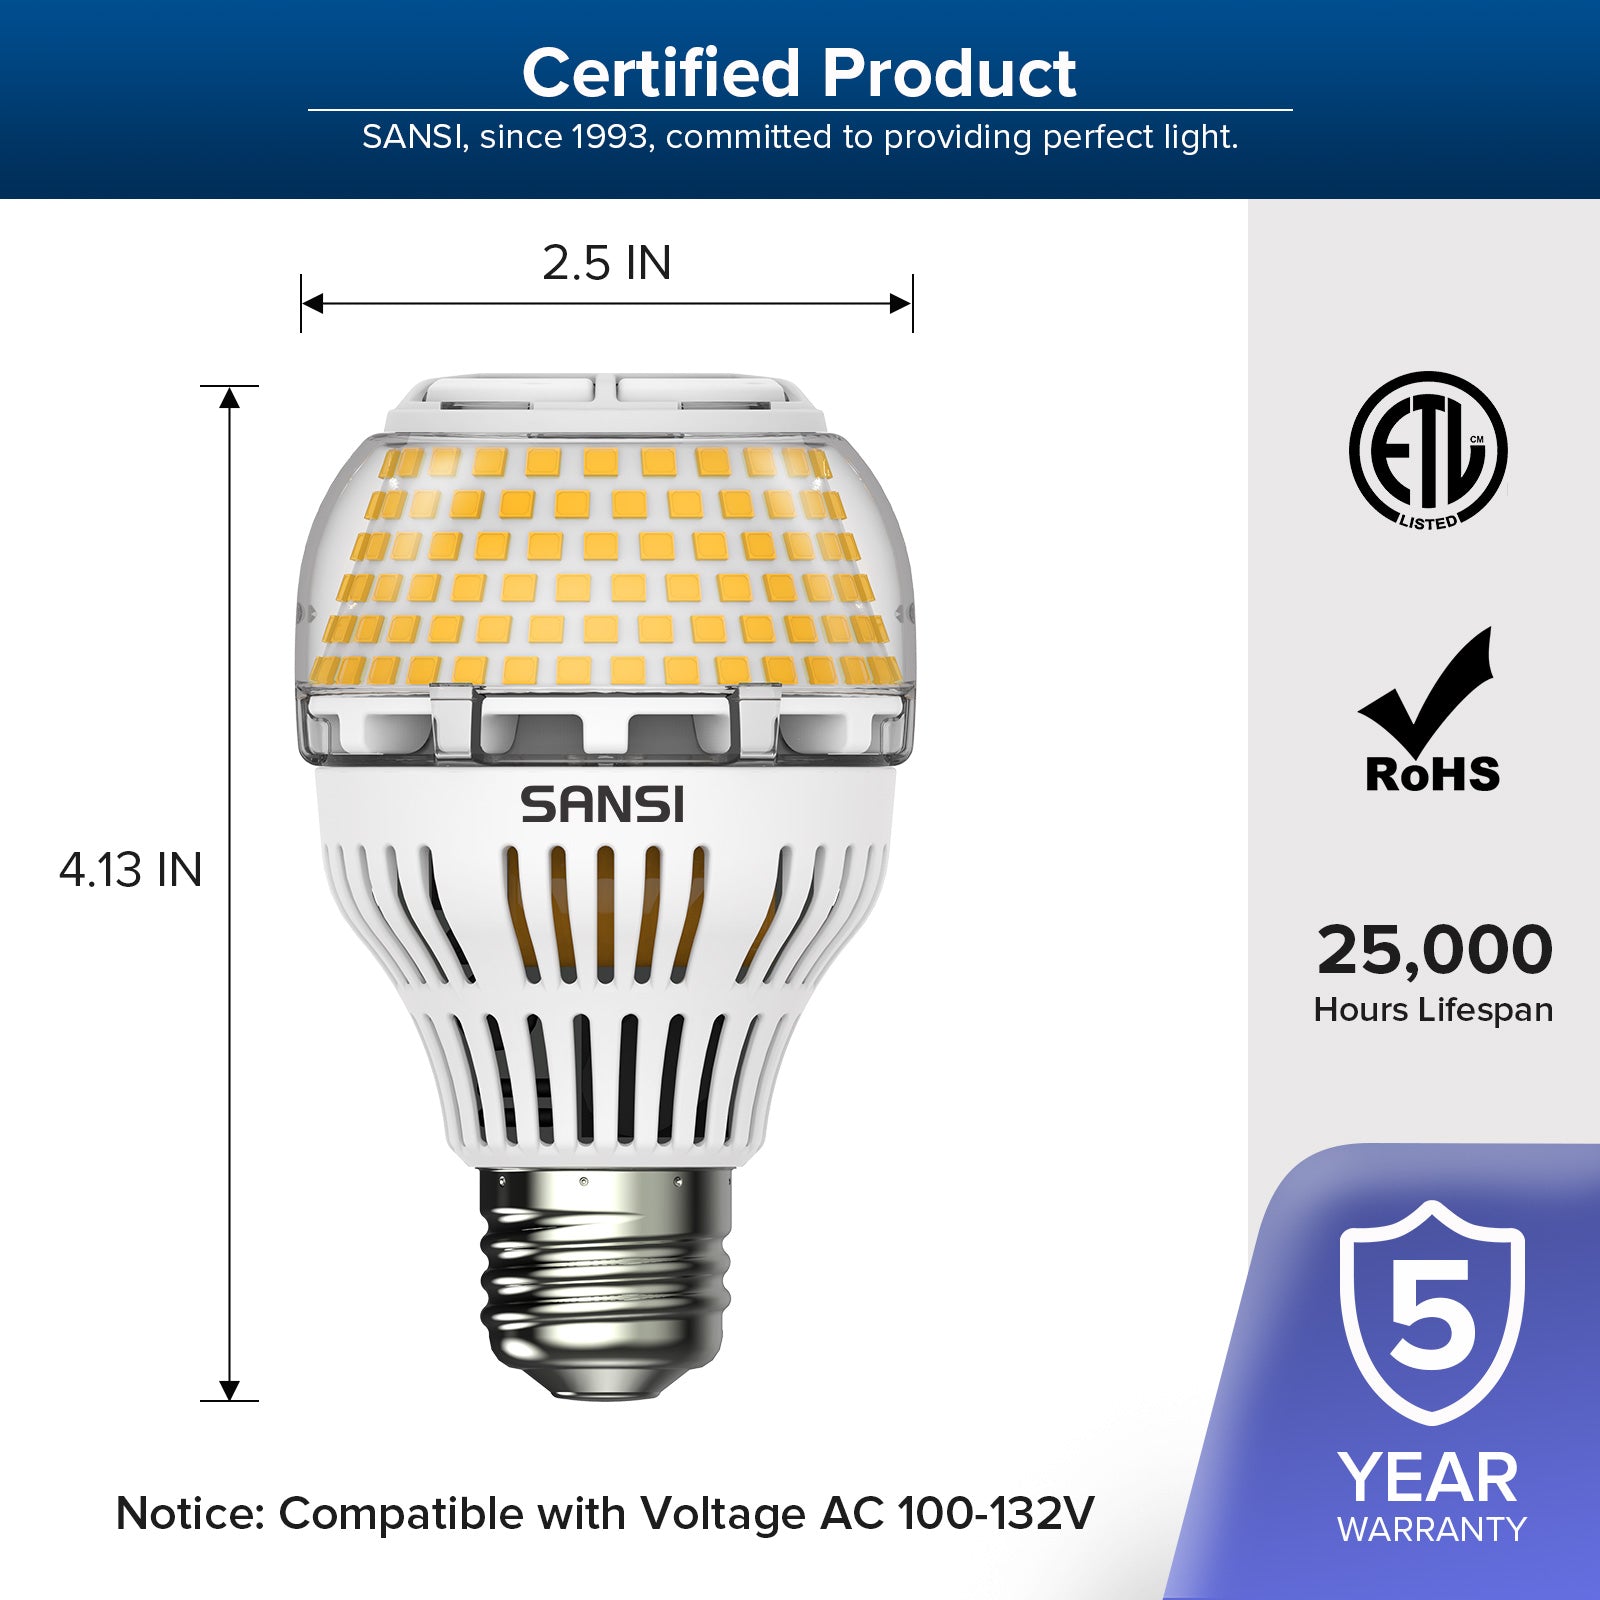 Dimmable A19 17W Led Light Bulb with energy efficient for living room has ROHS certification and 25,000 hours lifespan